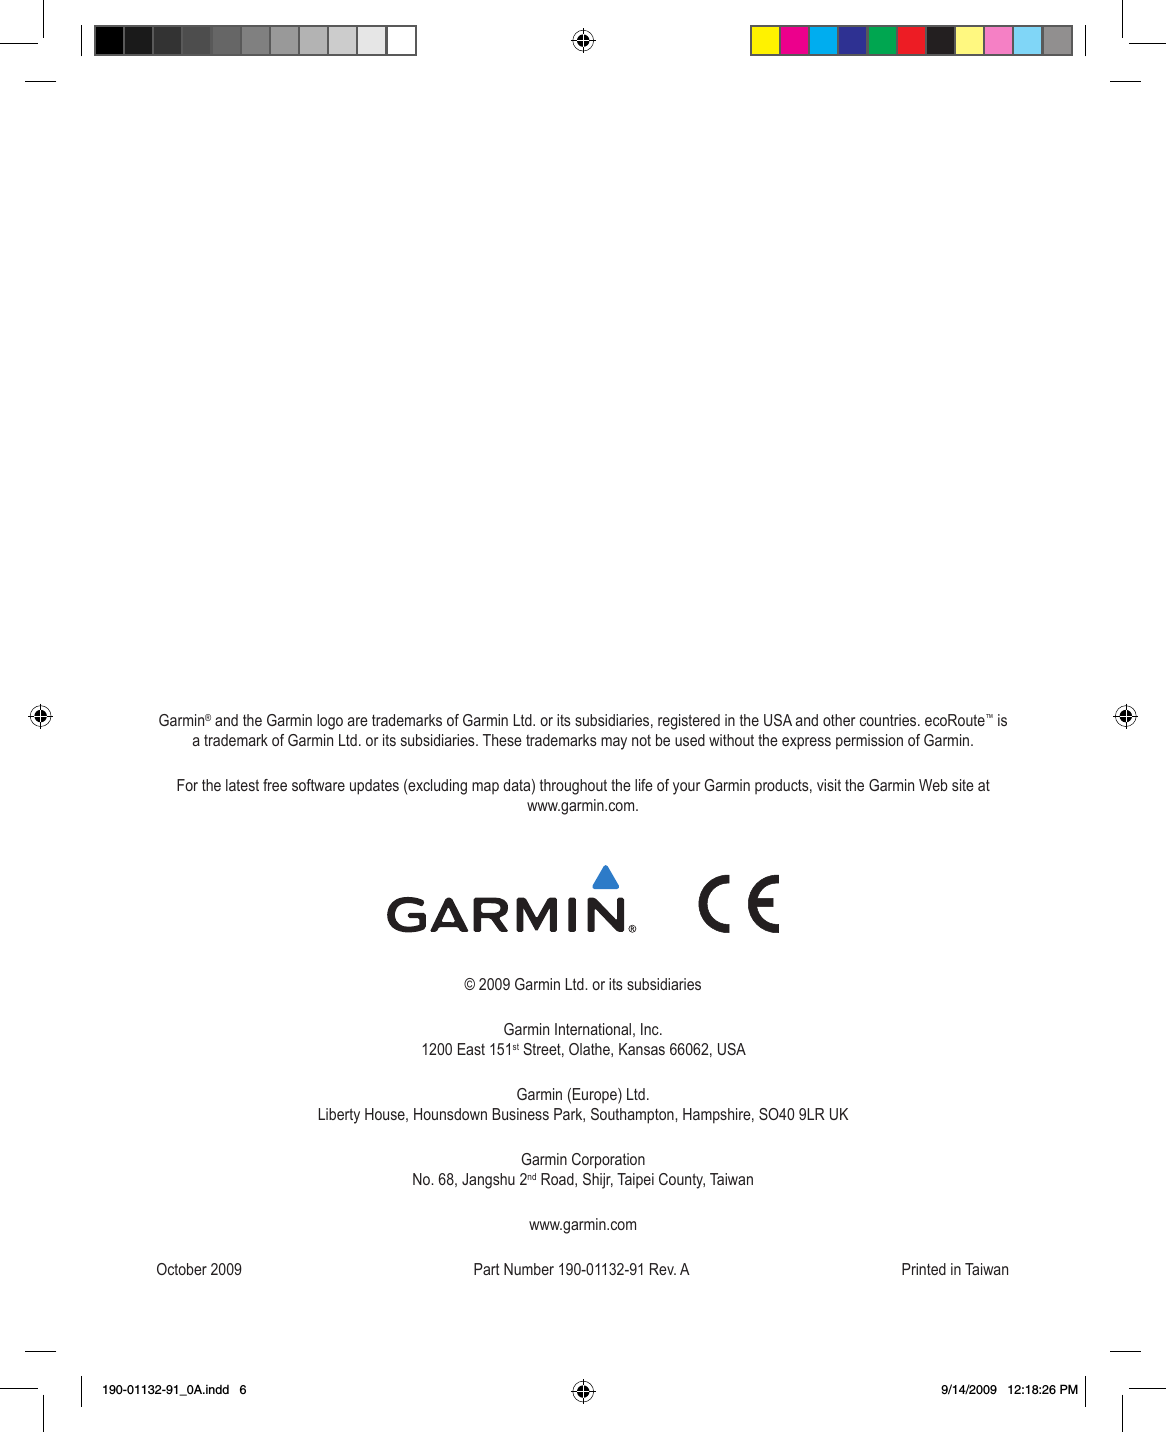 Garmin® and the Garmin logo are trademarks of Garmin Ltd. or its subsidiaries, registered in the USA and other countries. ecoRoute™ is a trademark of Garmin Ltd. or its subsidiaries. These trademarks may not be used without the express permission of Garmin.For the latest free software updates (excluding map data) throughout the life of your Garmin products, visit the Garmin Web site at  www.garmin.com.               © 2009 Garmin Ltd. or its subsidiariesGarmin International, Inc. 1200 East 151st Street, Olathe, Kansas 66062, USAGarmin (Europe) Ltd. Liberty House, Hounsdown Business Park, Southampton, Hampshire, SO40 9LR UKGarmin Corporation No. 68, Jangshu 2nd Road, Shijr, Taipei County, Taiwanwww.garmin.comOctober 2009  Part Number 190-01132-91 Rev. A  Printed in Taiwan190-01132-91_0A.indd   6 9/14/2009   12:18:26 PM